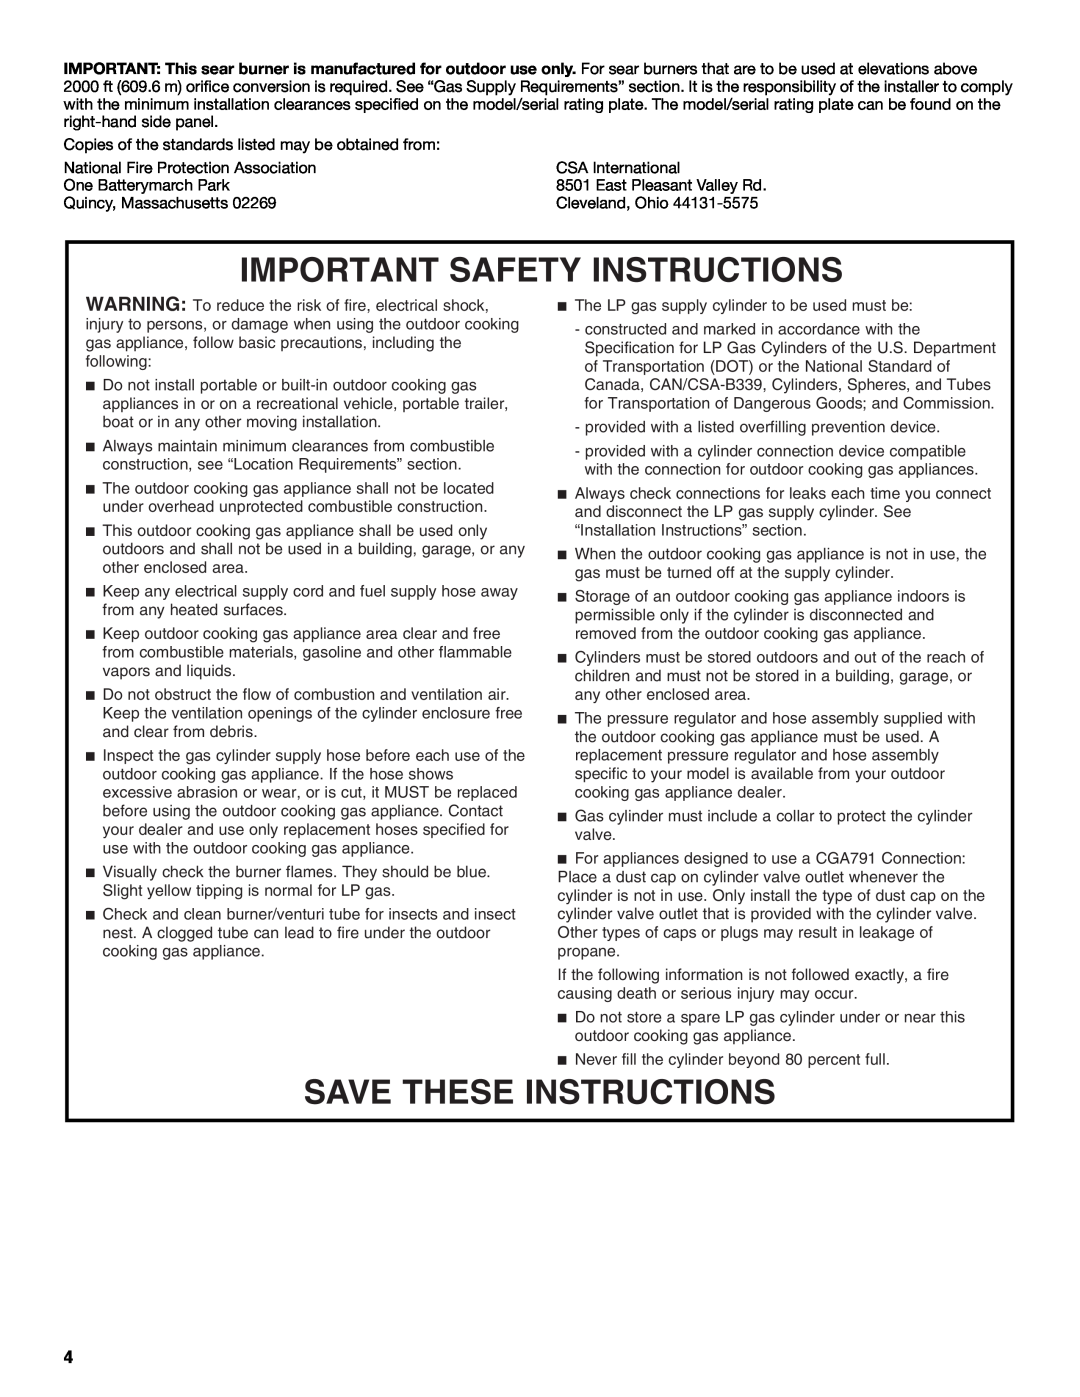 KitchenAid KBEU121T Important Safety Instructions, Save These Instructions, National Fire Protection Association 